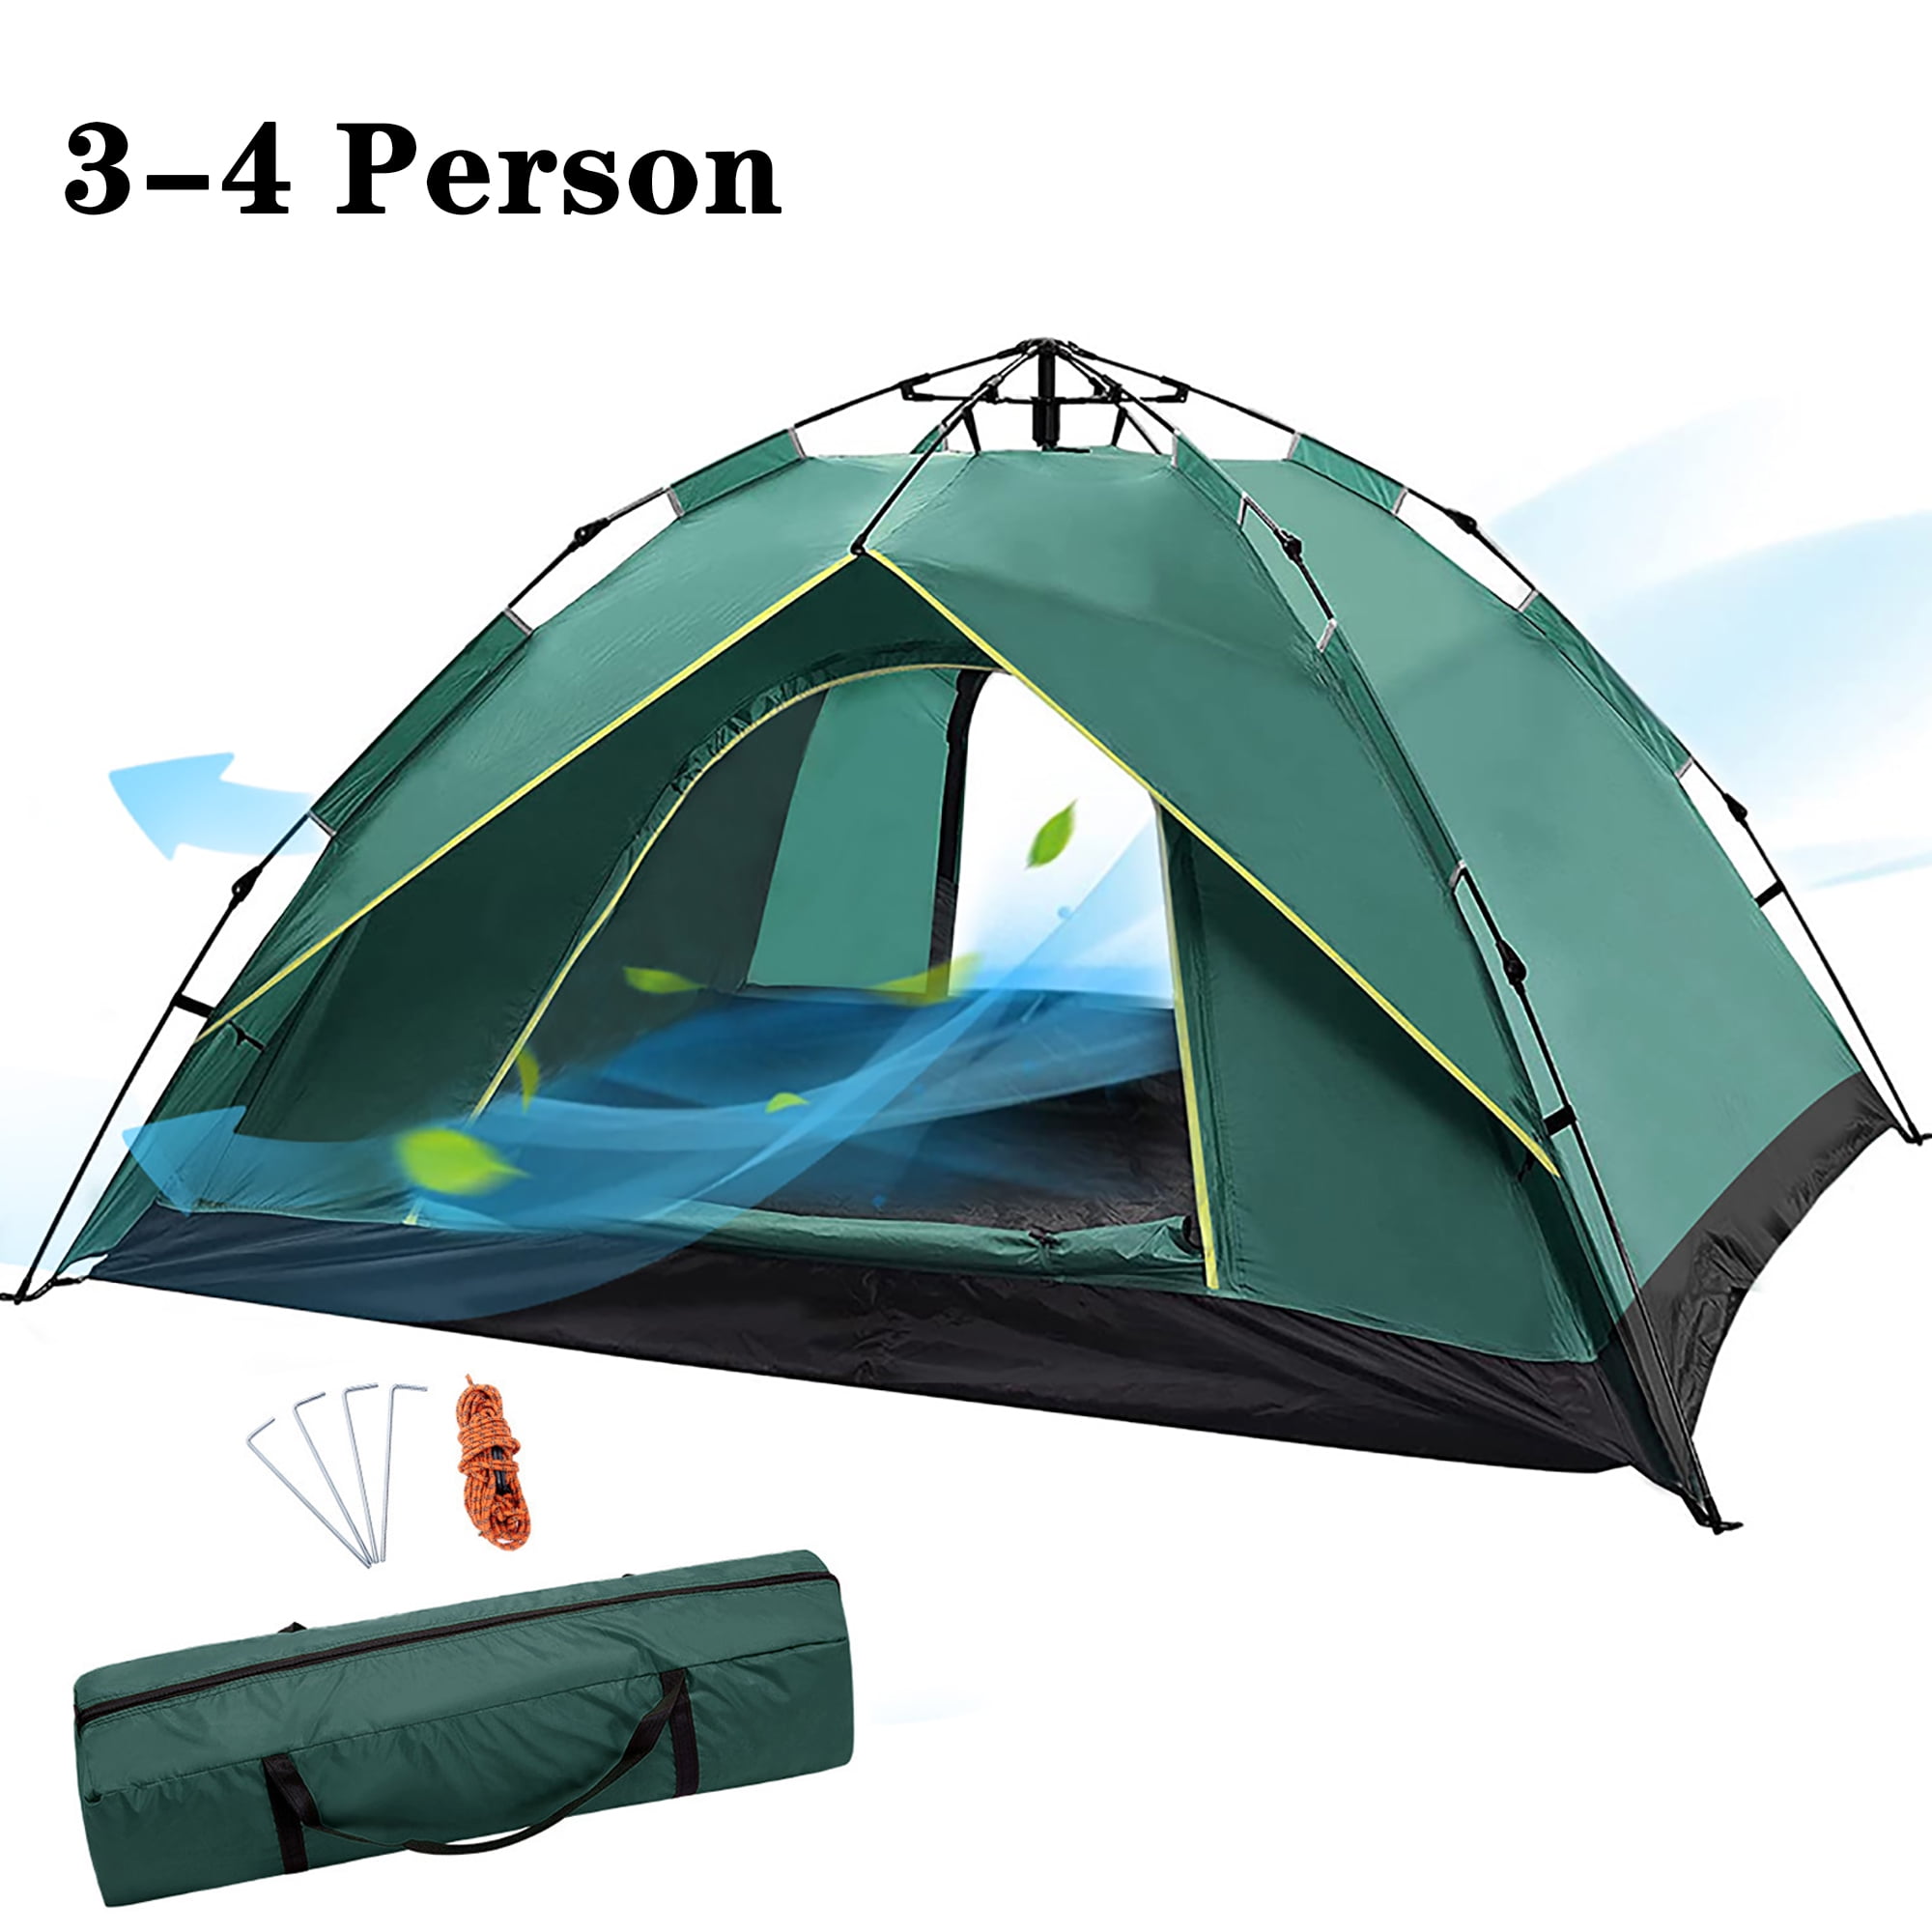 Large 4 Person Family Camping Tent Instant Double Layer PopUp Automatic Festival 